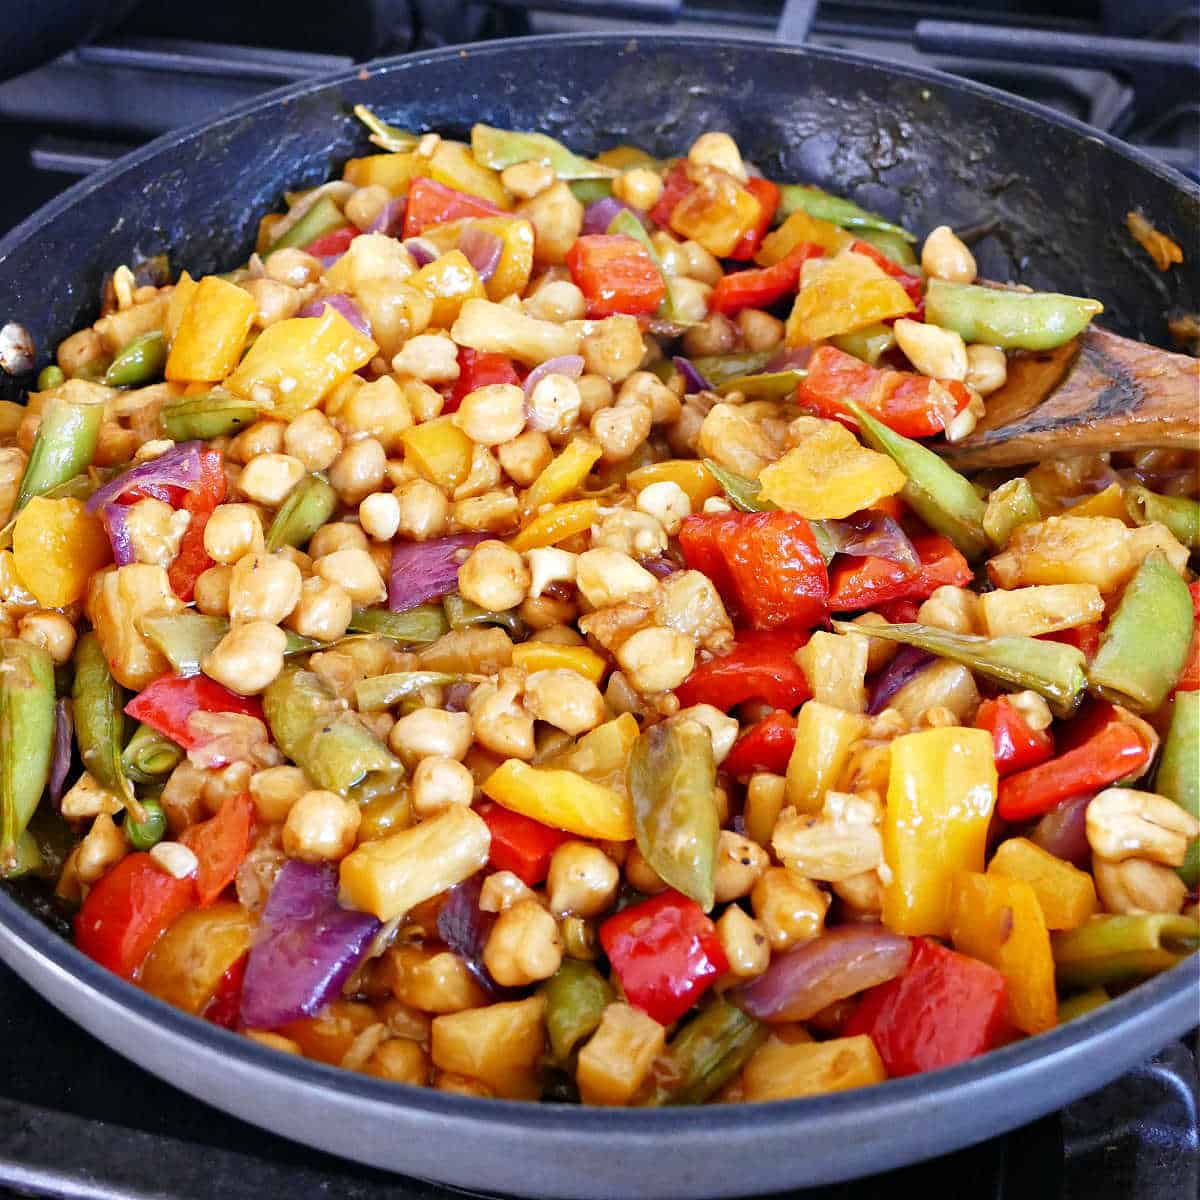 chickpea stir fry coated with pineapple sauce cooking in a large skillet